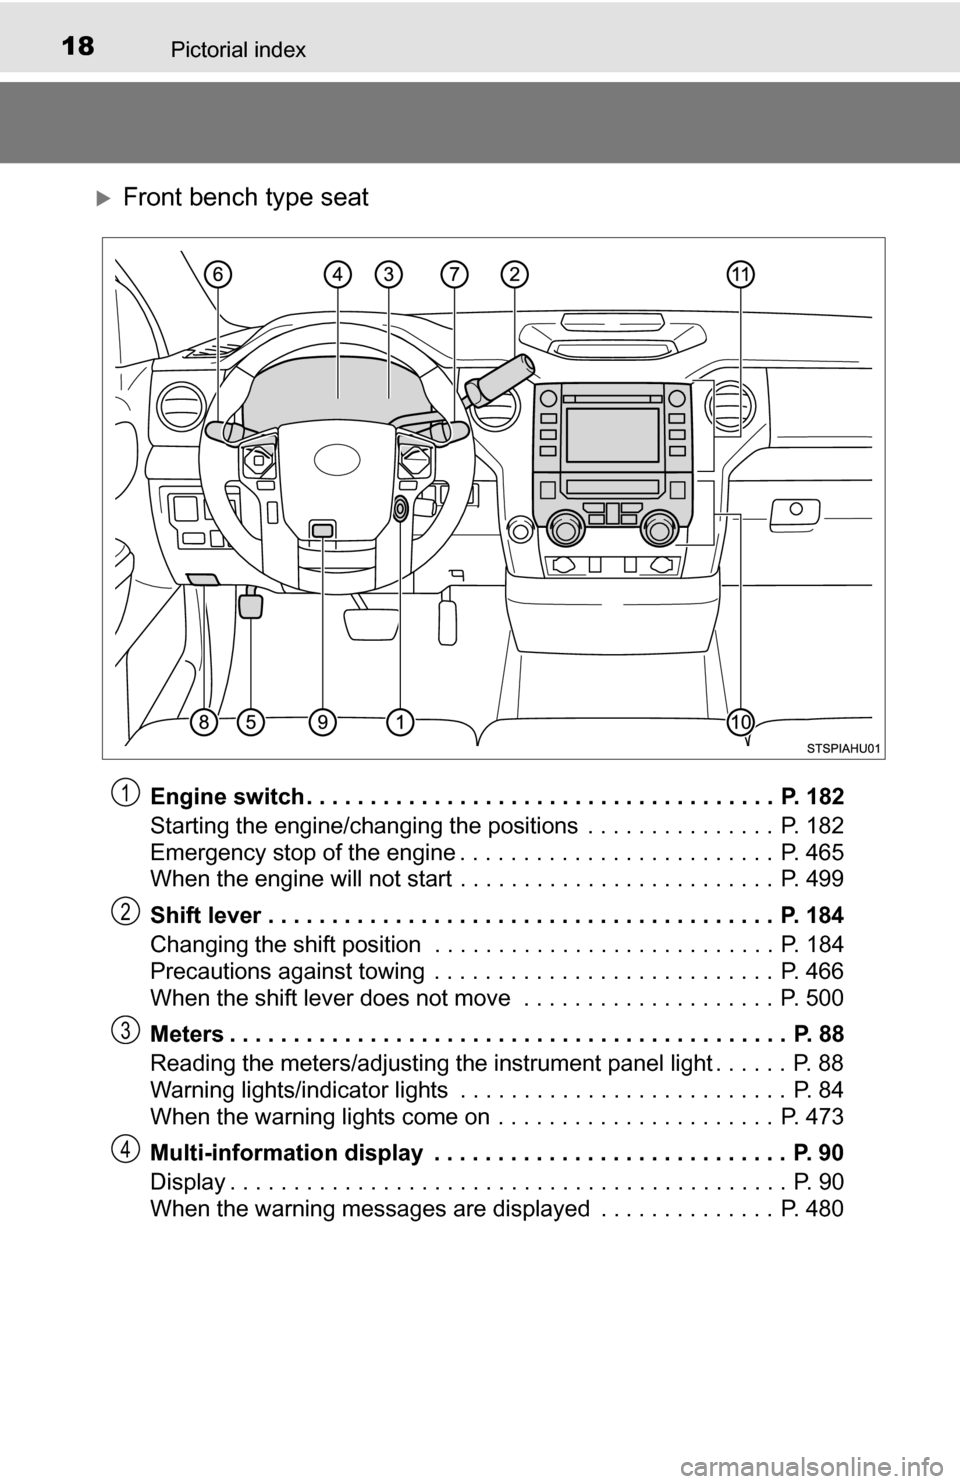 TOYOTA TUNDRA 2016 2.G Owners Manual 18Pictorial index
Front bench type seat
Engine switch . . . . . . . . . . . . . . . . . . . . . . . . . . . . . . . . . . . . .  P. 182
Starting the engine/changing the positions  . . . . . . . . .